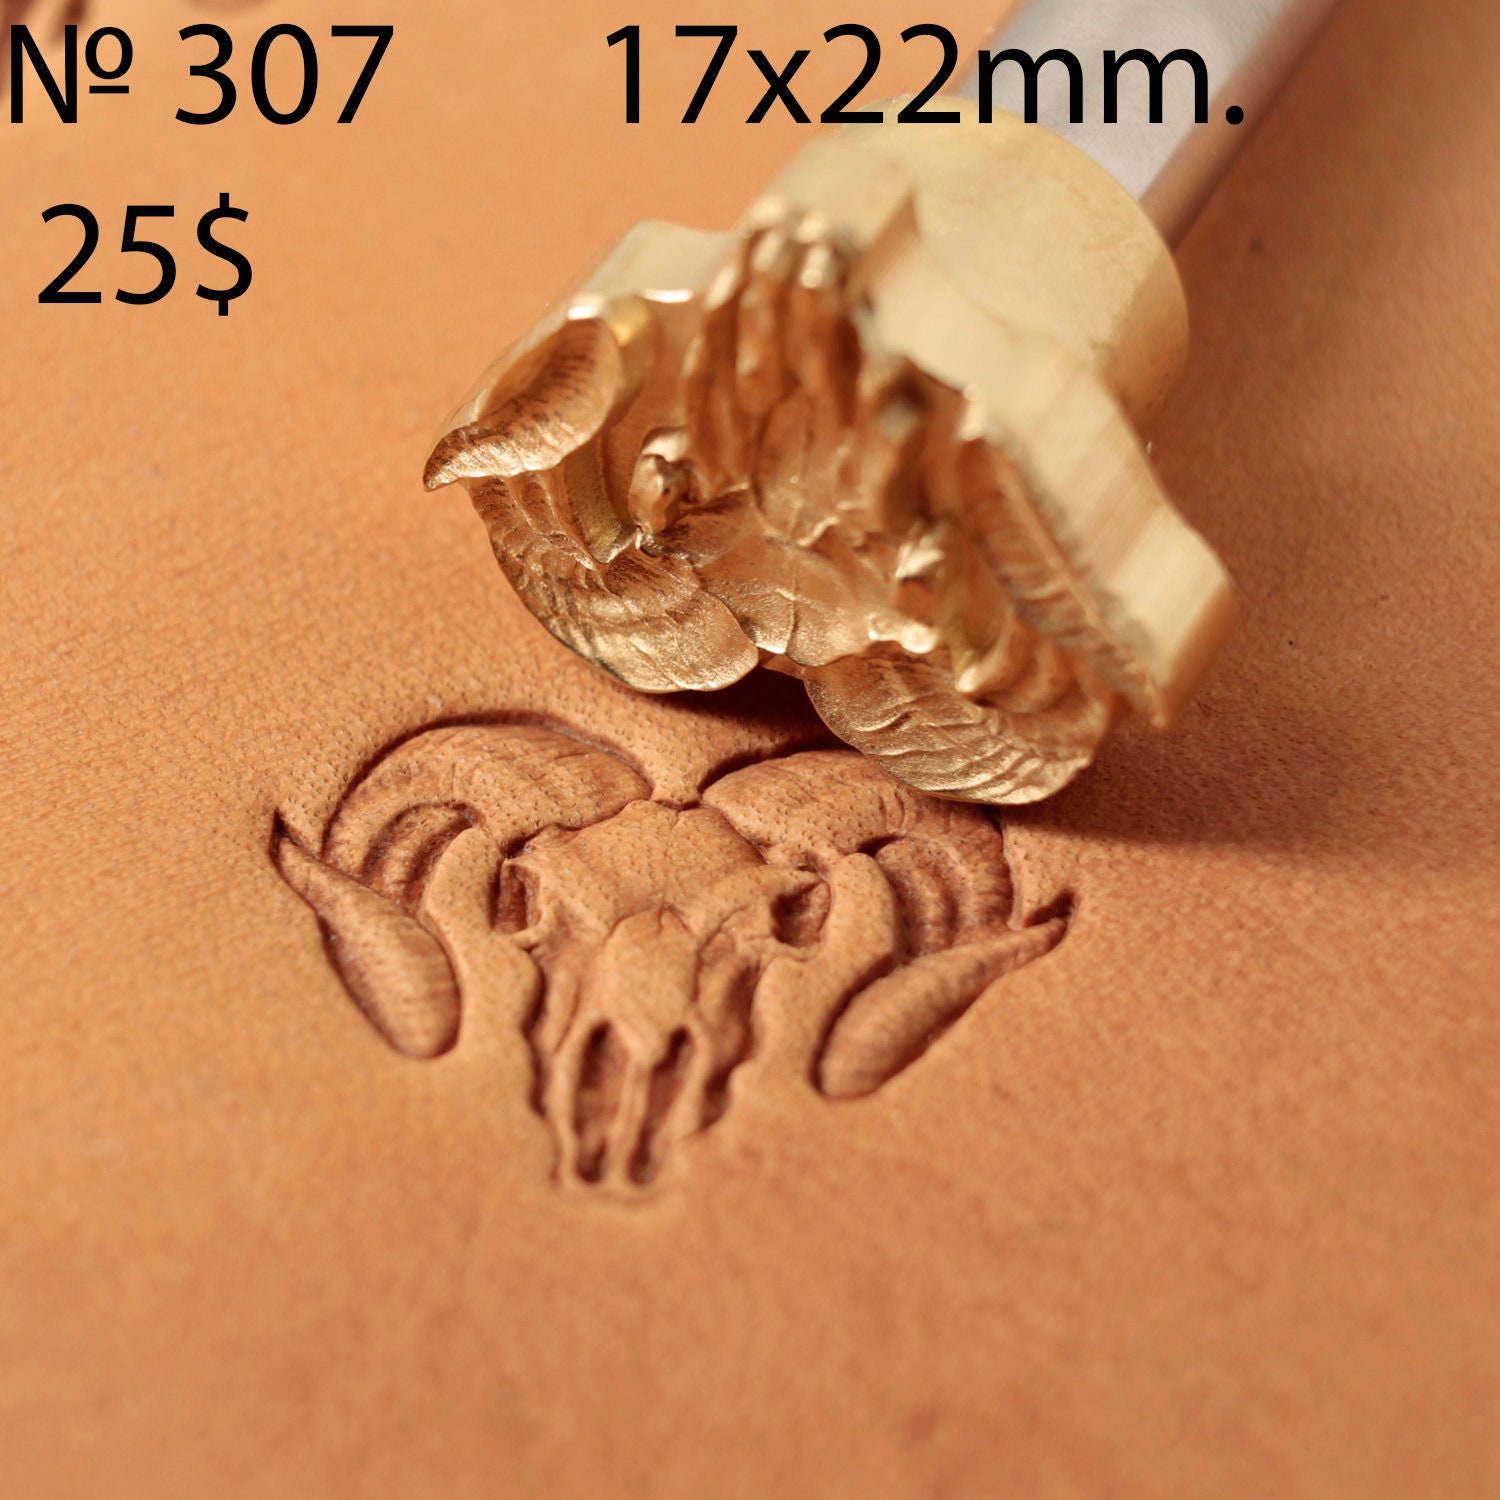 Skull leather crafting stamp tool crafts brass saddle making stamps #A6 